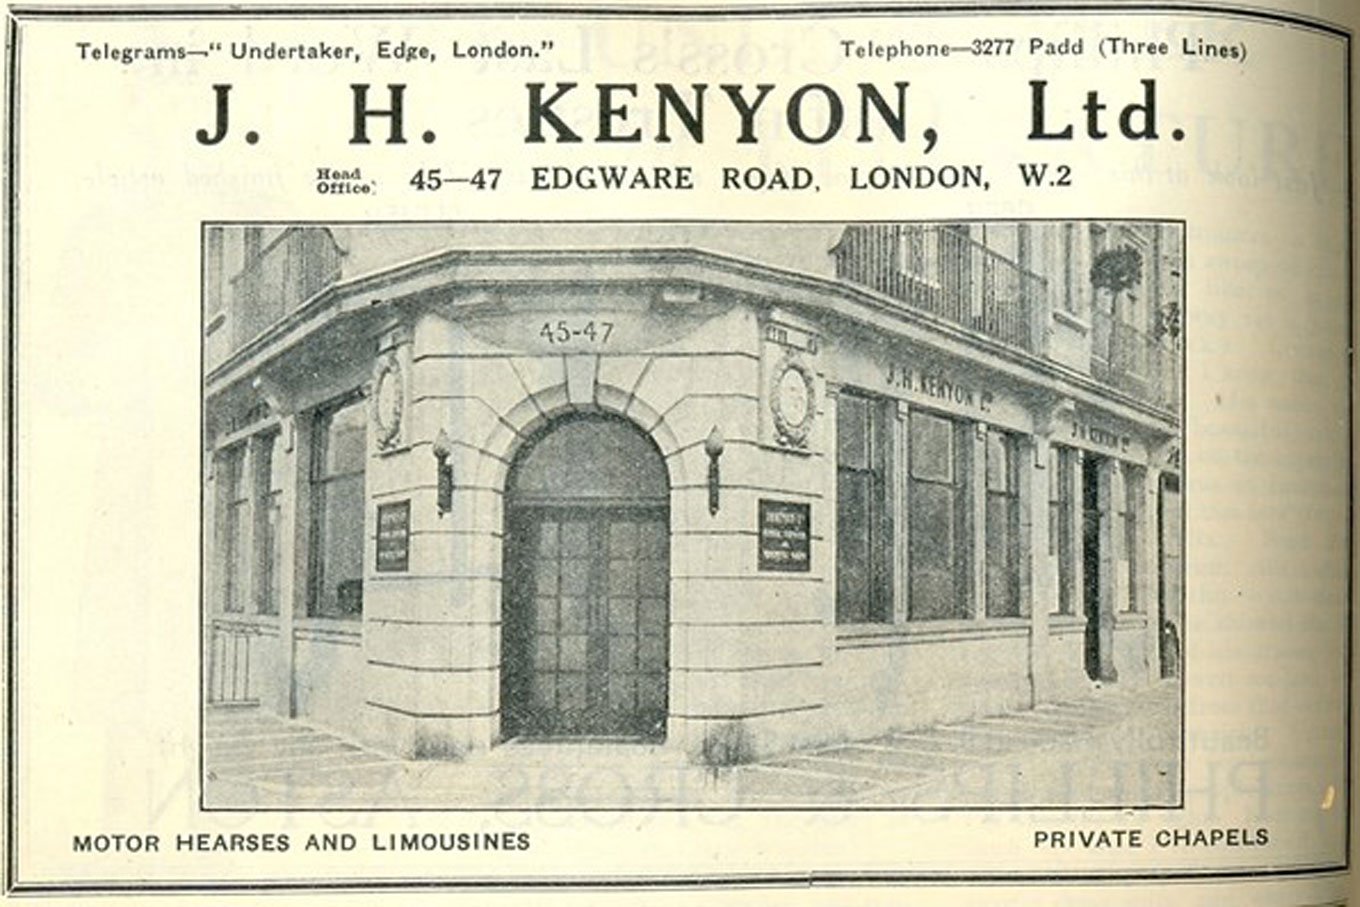 A clipping from a newspaper advert for JH Kenton funeral directors